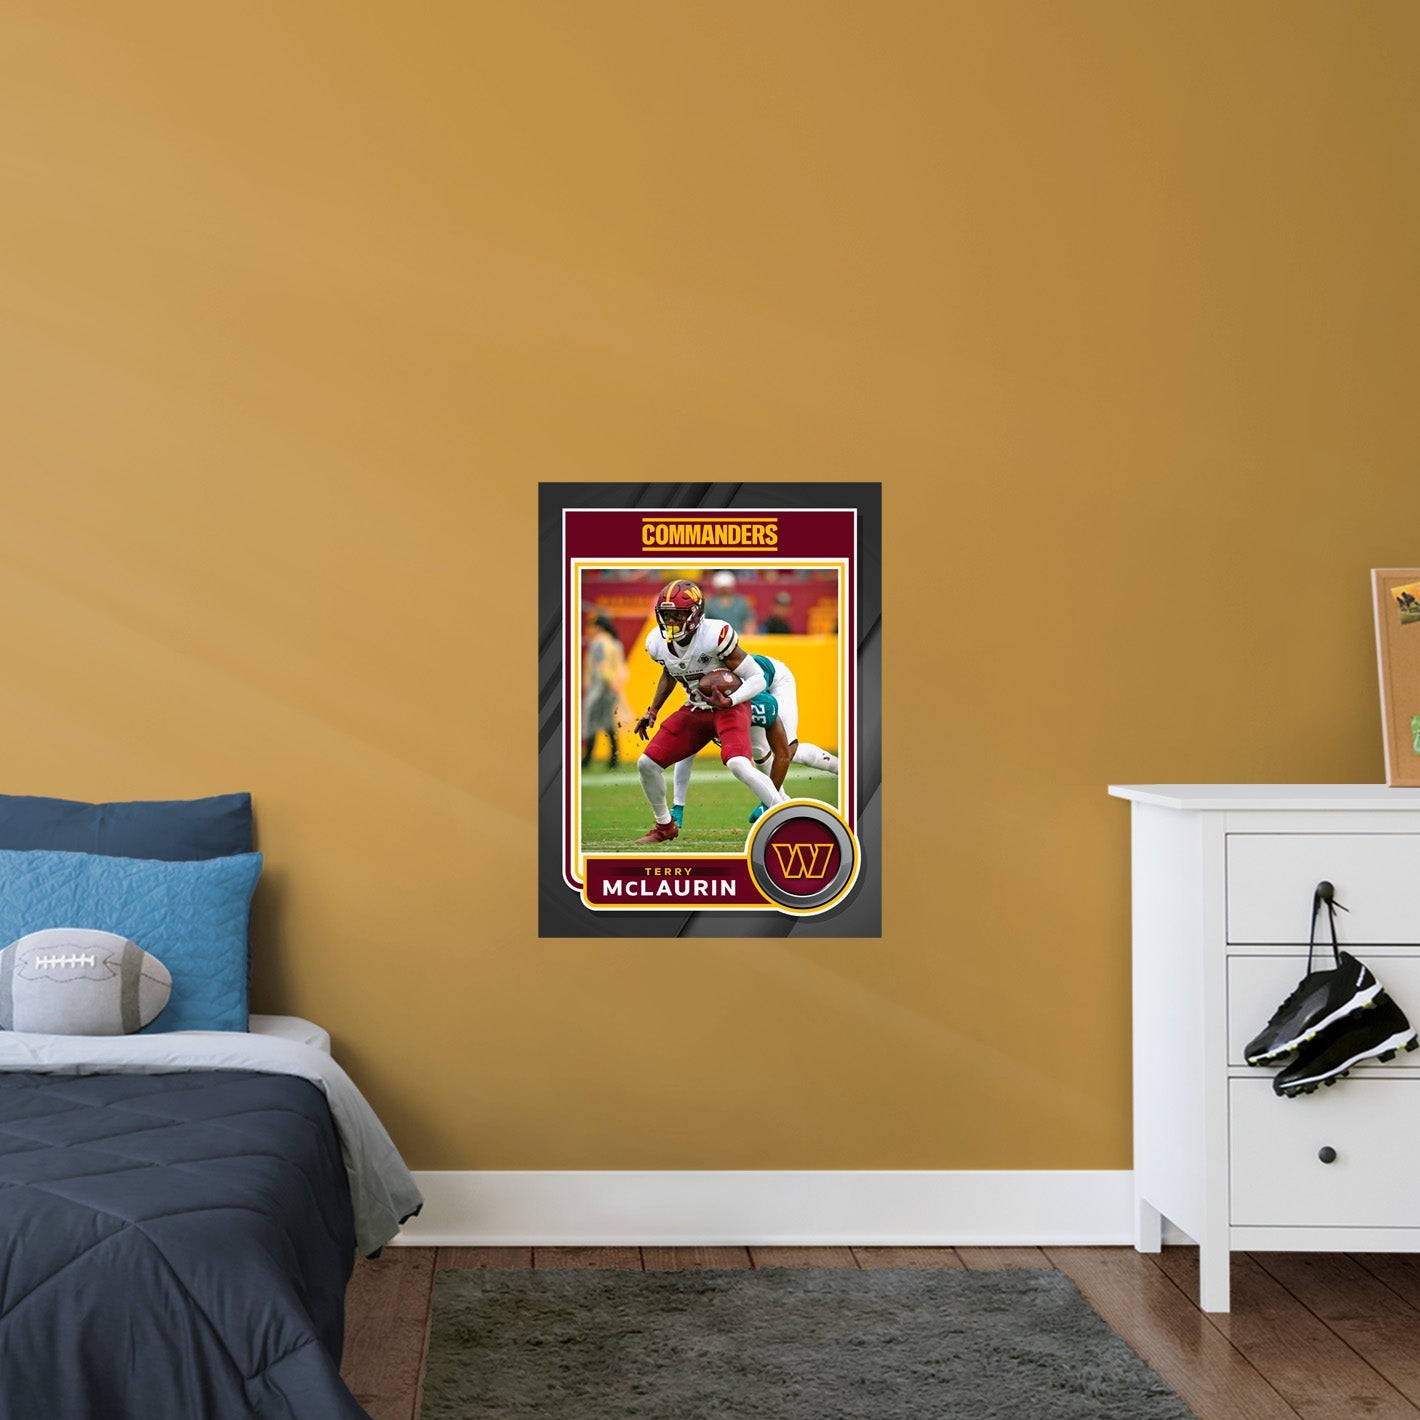 Washington Commanders: Terry McLaurin Poster - Officially Licensed NFL Removable Adhesive Decal